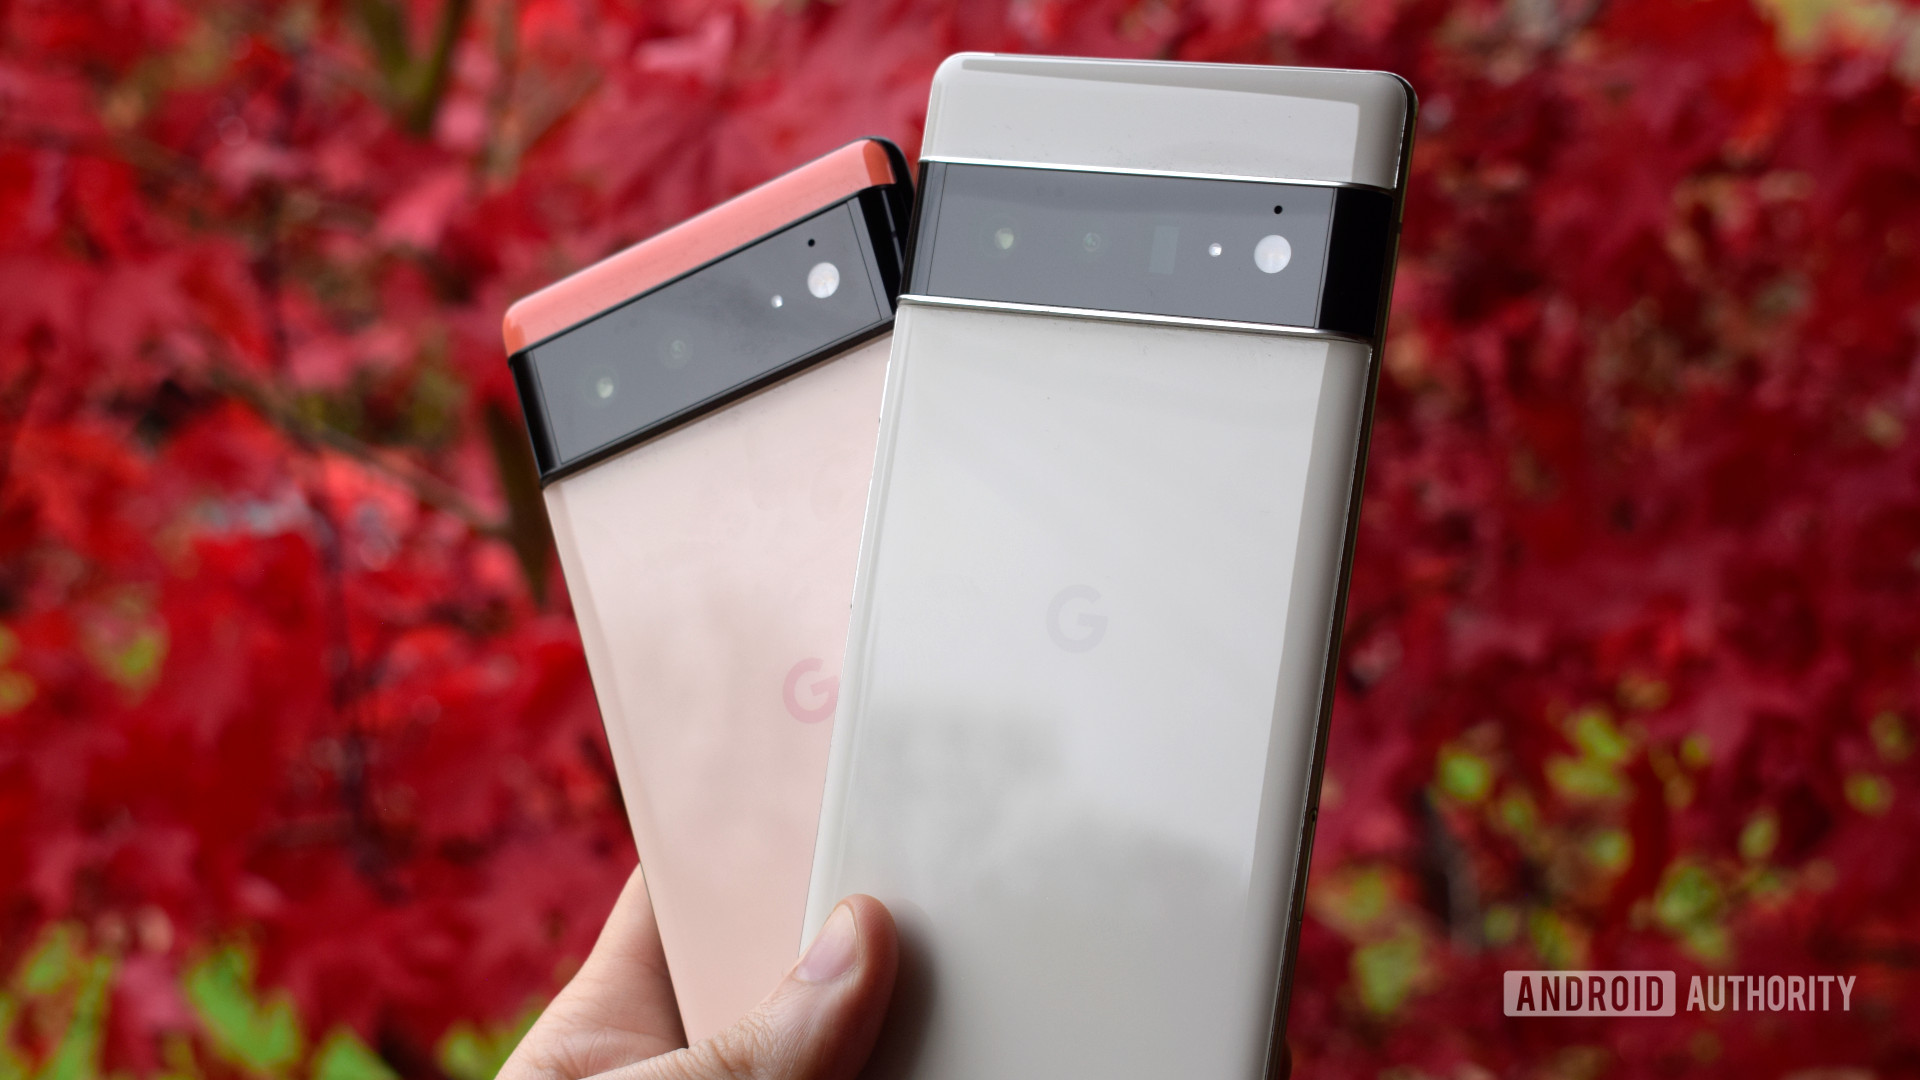 Google Pixel 6 and Pixel 6 Pro on red leaf background